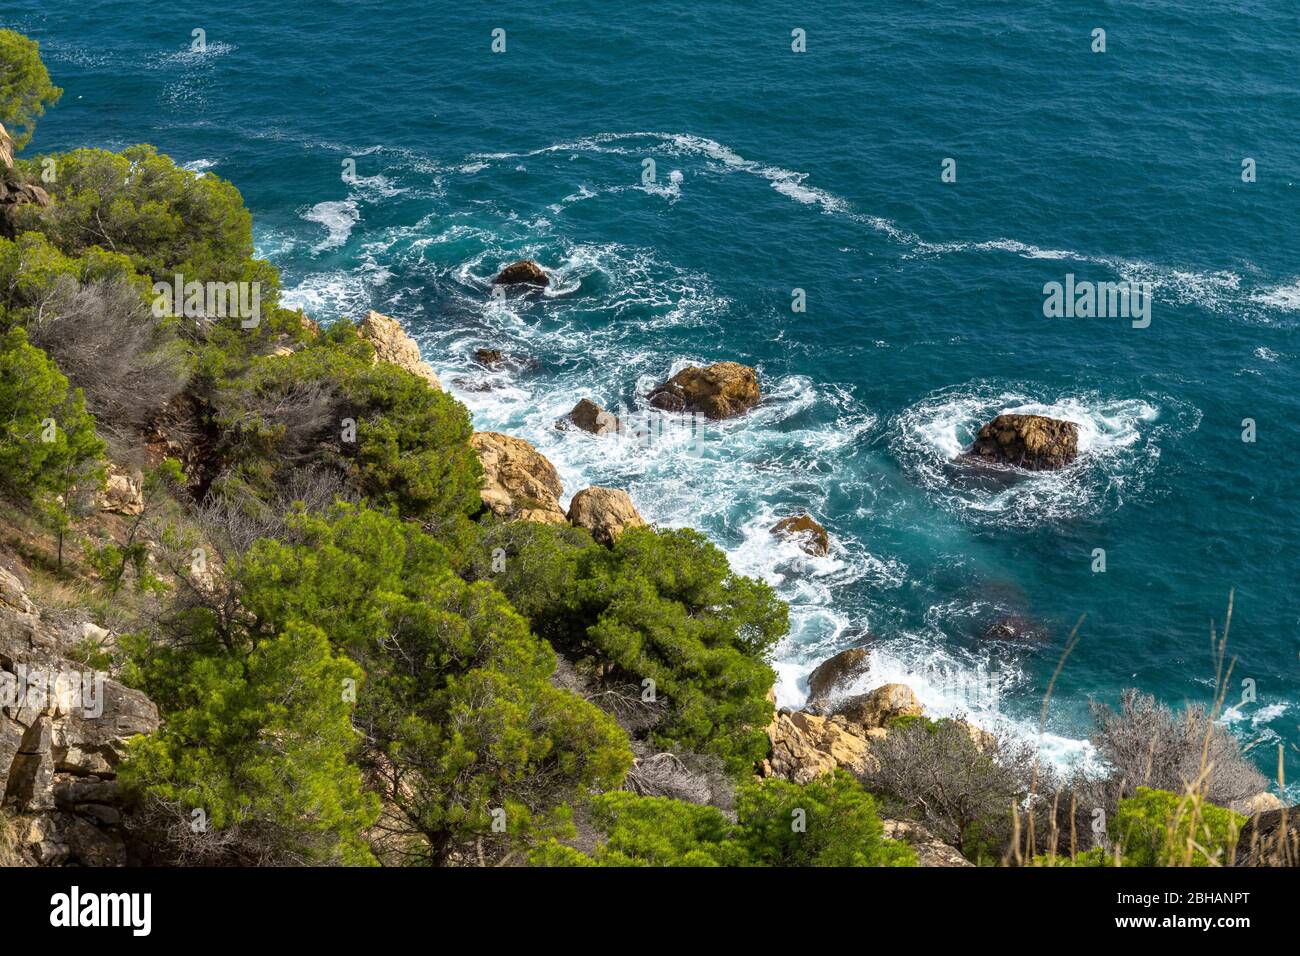 Europe, Spain, Catalonia, Costa Brava, looking down on the surf on the Costa Brava between Cadaqués and Roses Stock Photo